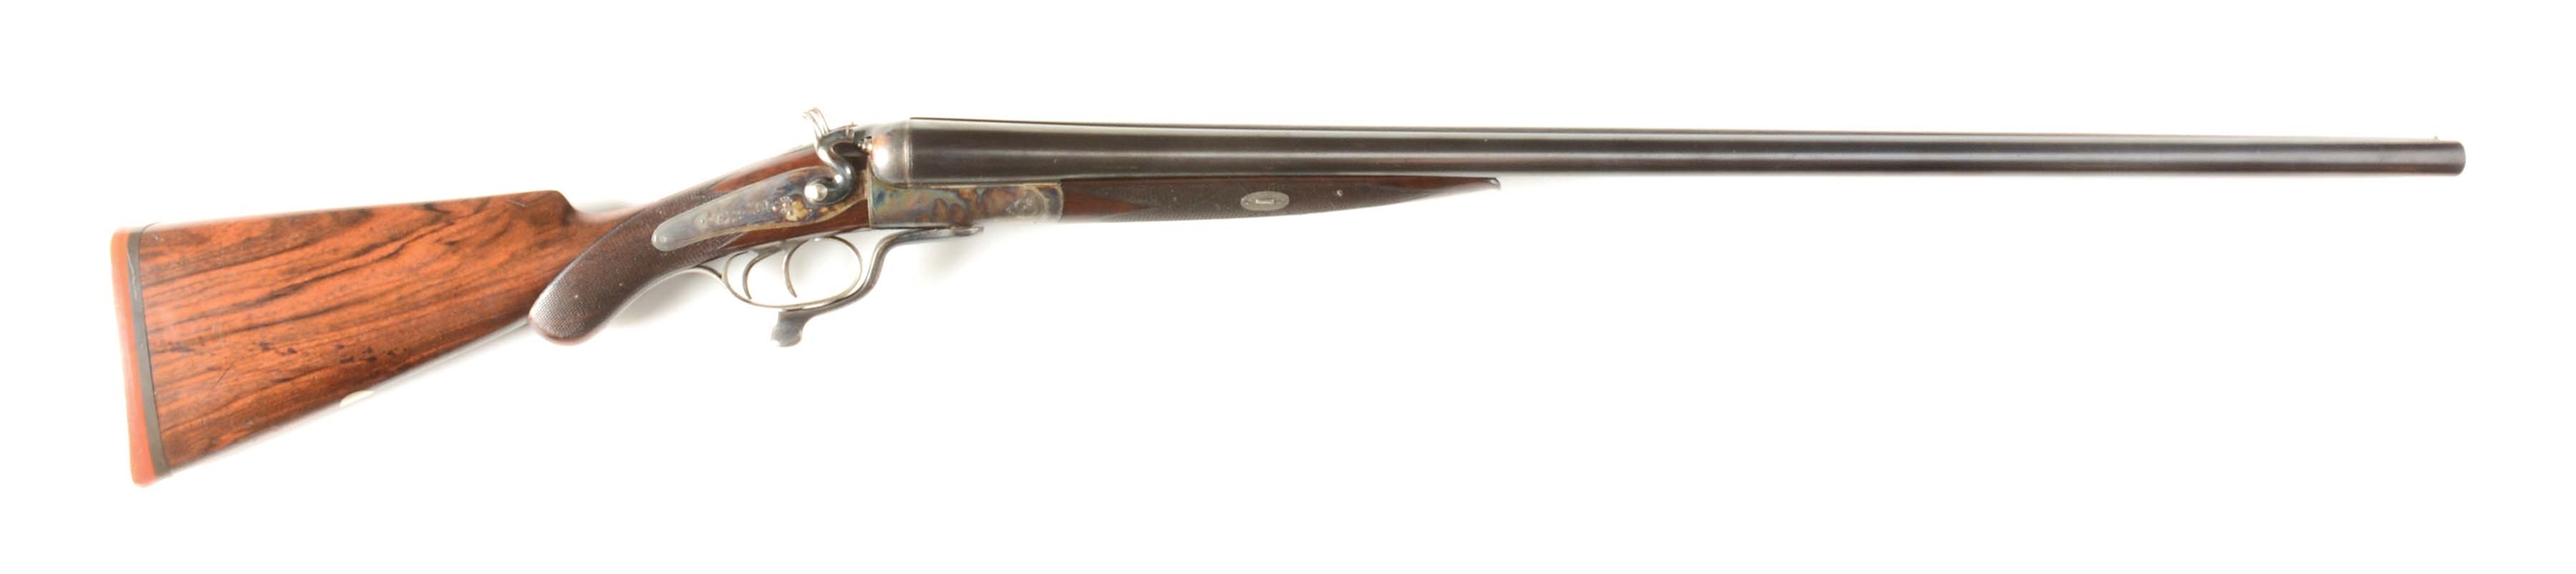 (C) SUPERB CONDITION STEEL BARRELED 8 GAUGE ARMY NAVY COOPERATIVE SOCIETY SIDE BY SIDE DOUBLE HAMMER SHOTGUN.